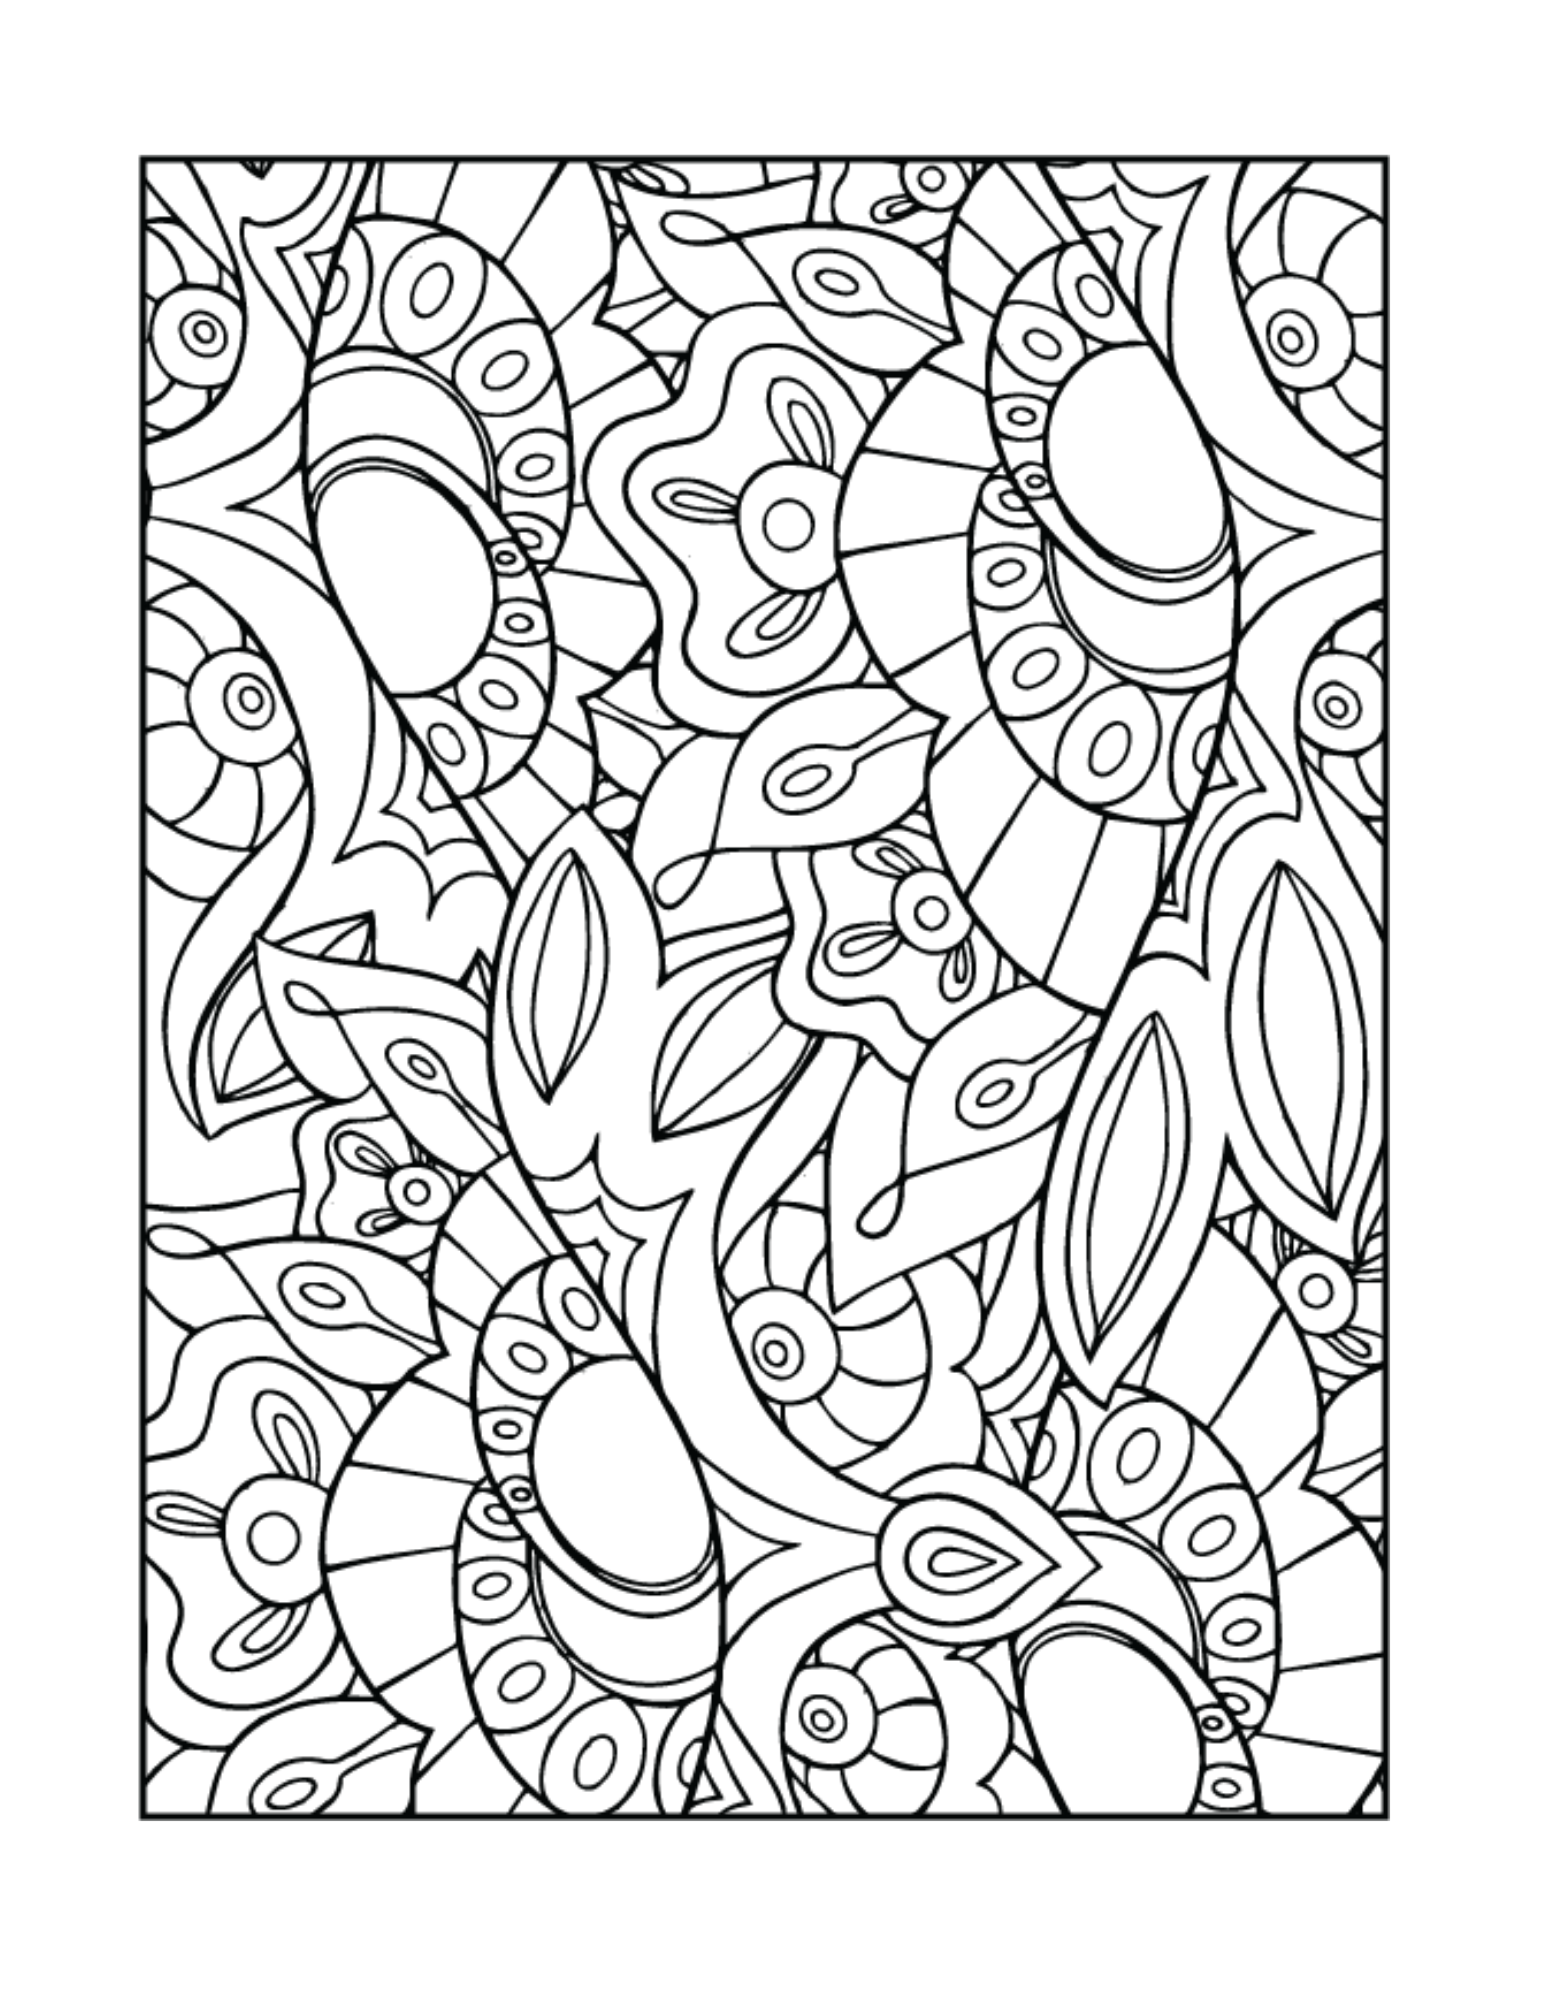 Anxiety Relief Coloring Book For Adults: Enjoy Over 50 Adult Coloring Pages  in Stress Relieving Mindfulness Mandala Style | For Adults Relaxation and